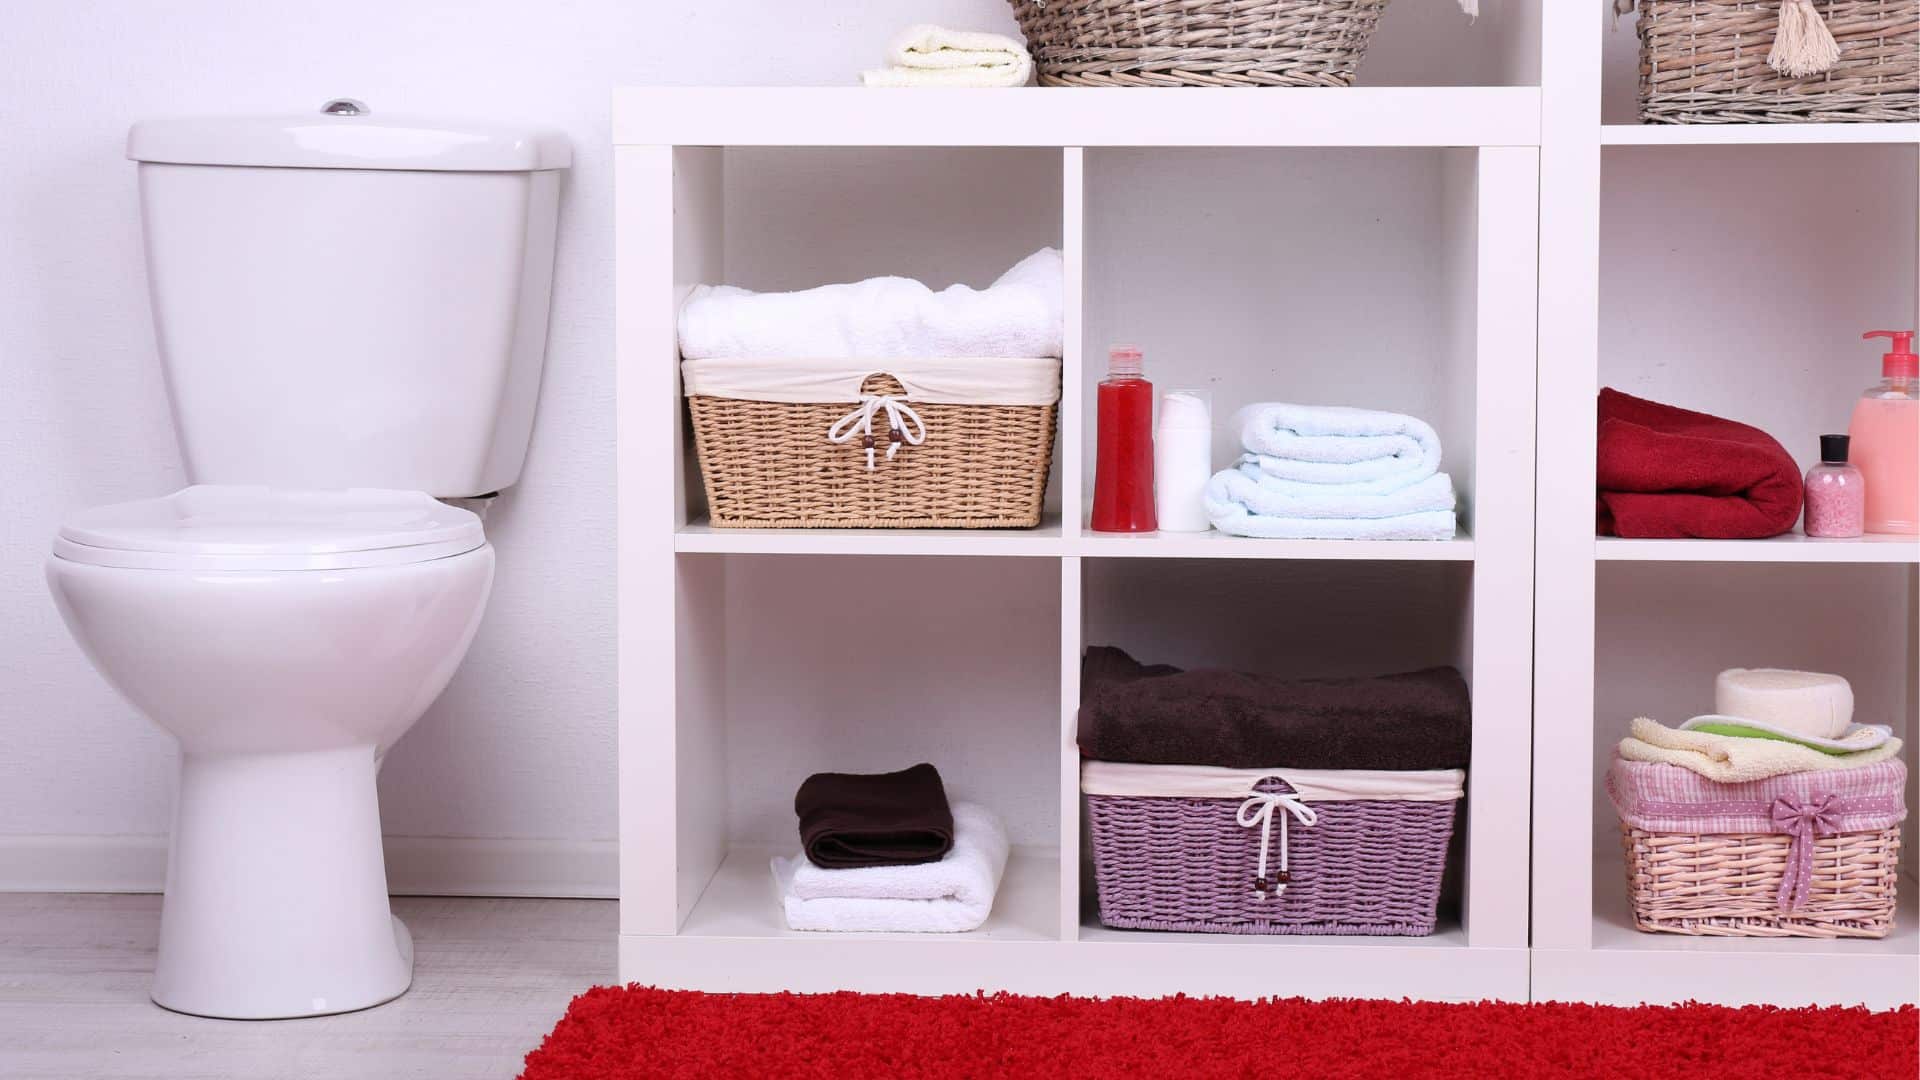 Toilet with open closet